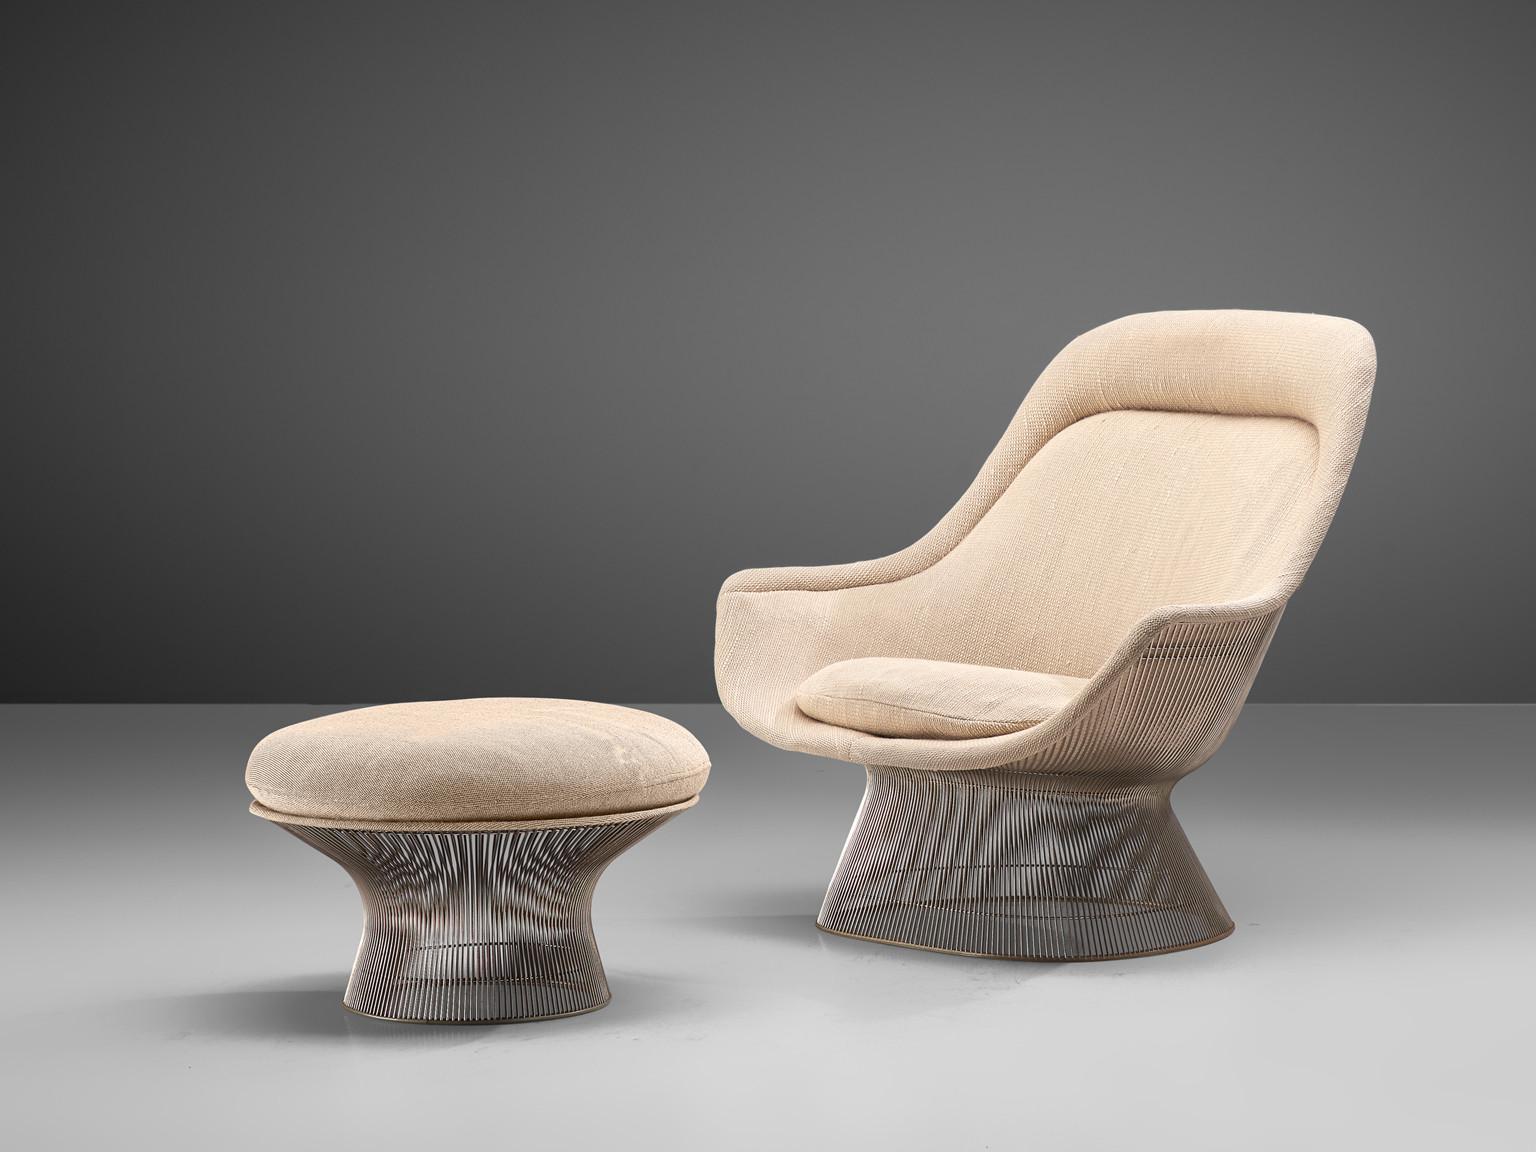 Warren Platner for Knoll, easy chair 'model 1705' and ottoman, steel and beige fabric, United States, design 1966, production later.

This iconic easy chair by Warren Platner is created by welding curved steel rods to circular and semi-circular